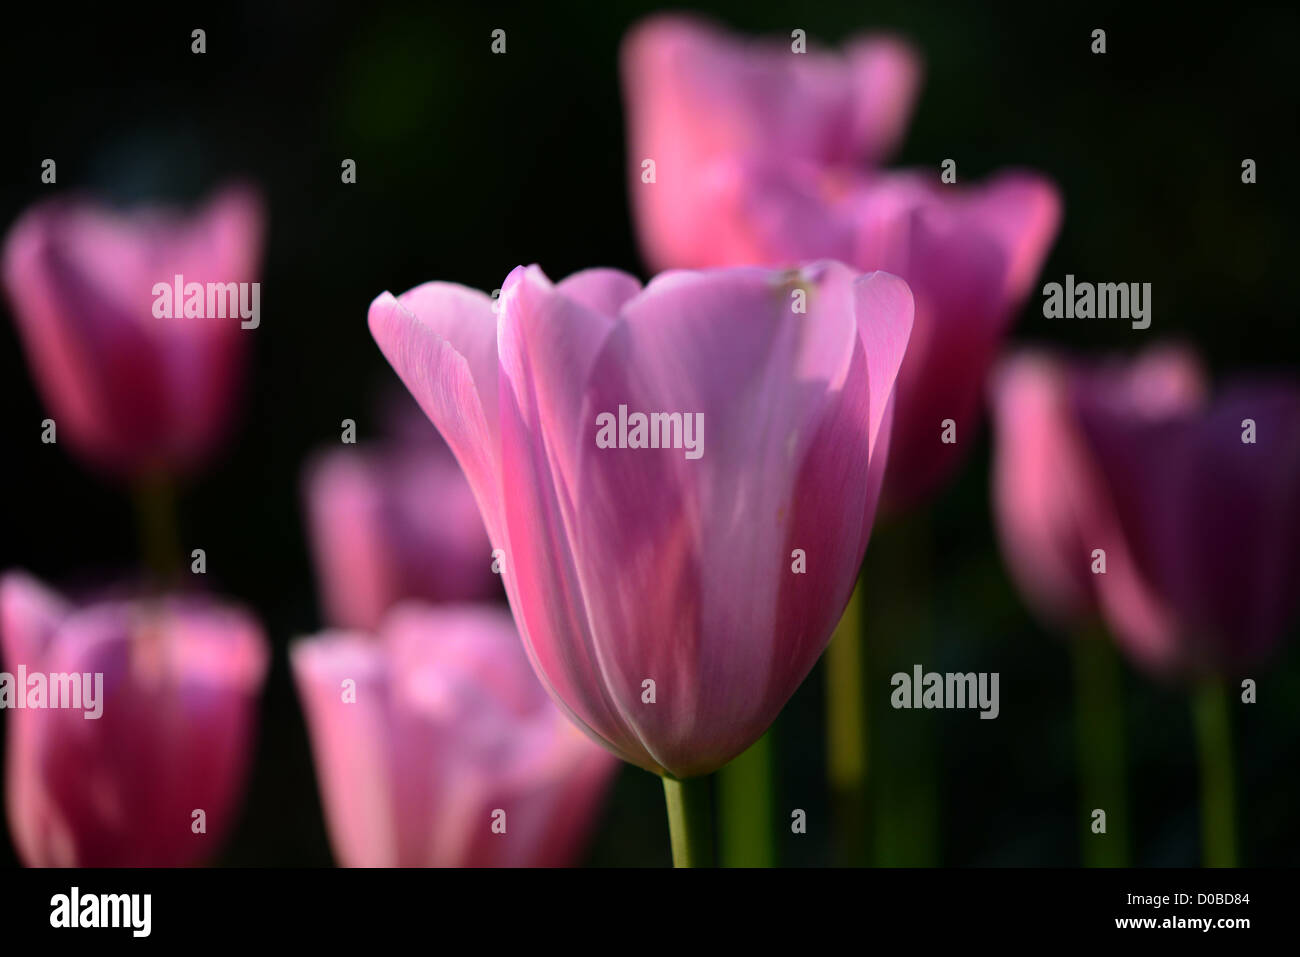 Pink Tulips Restricted Focus Image Stock Photo